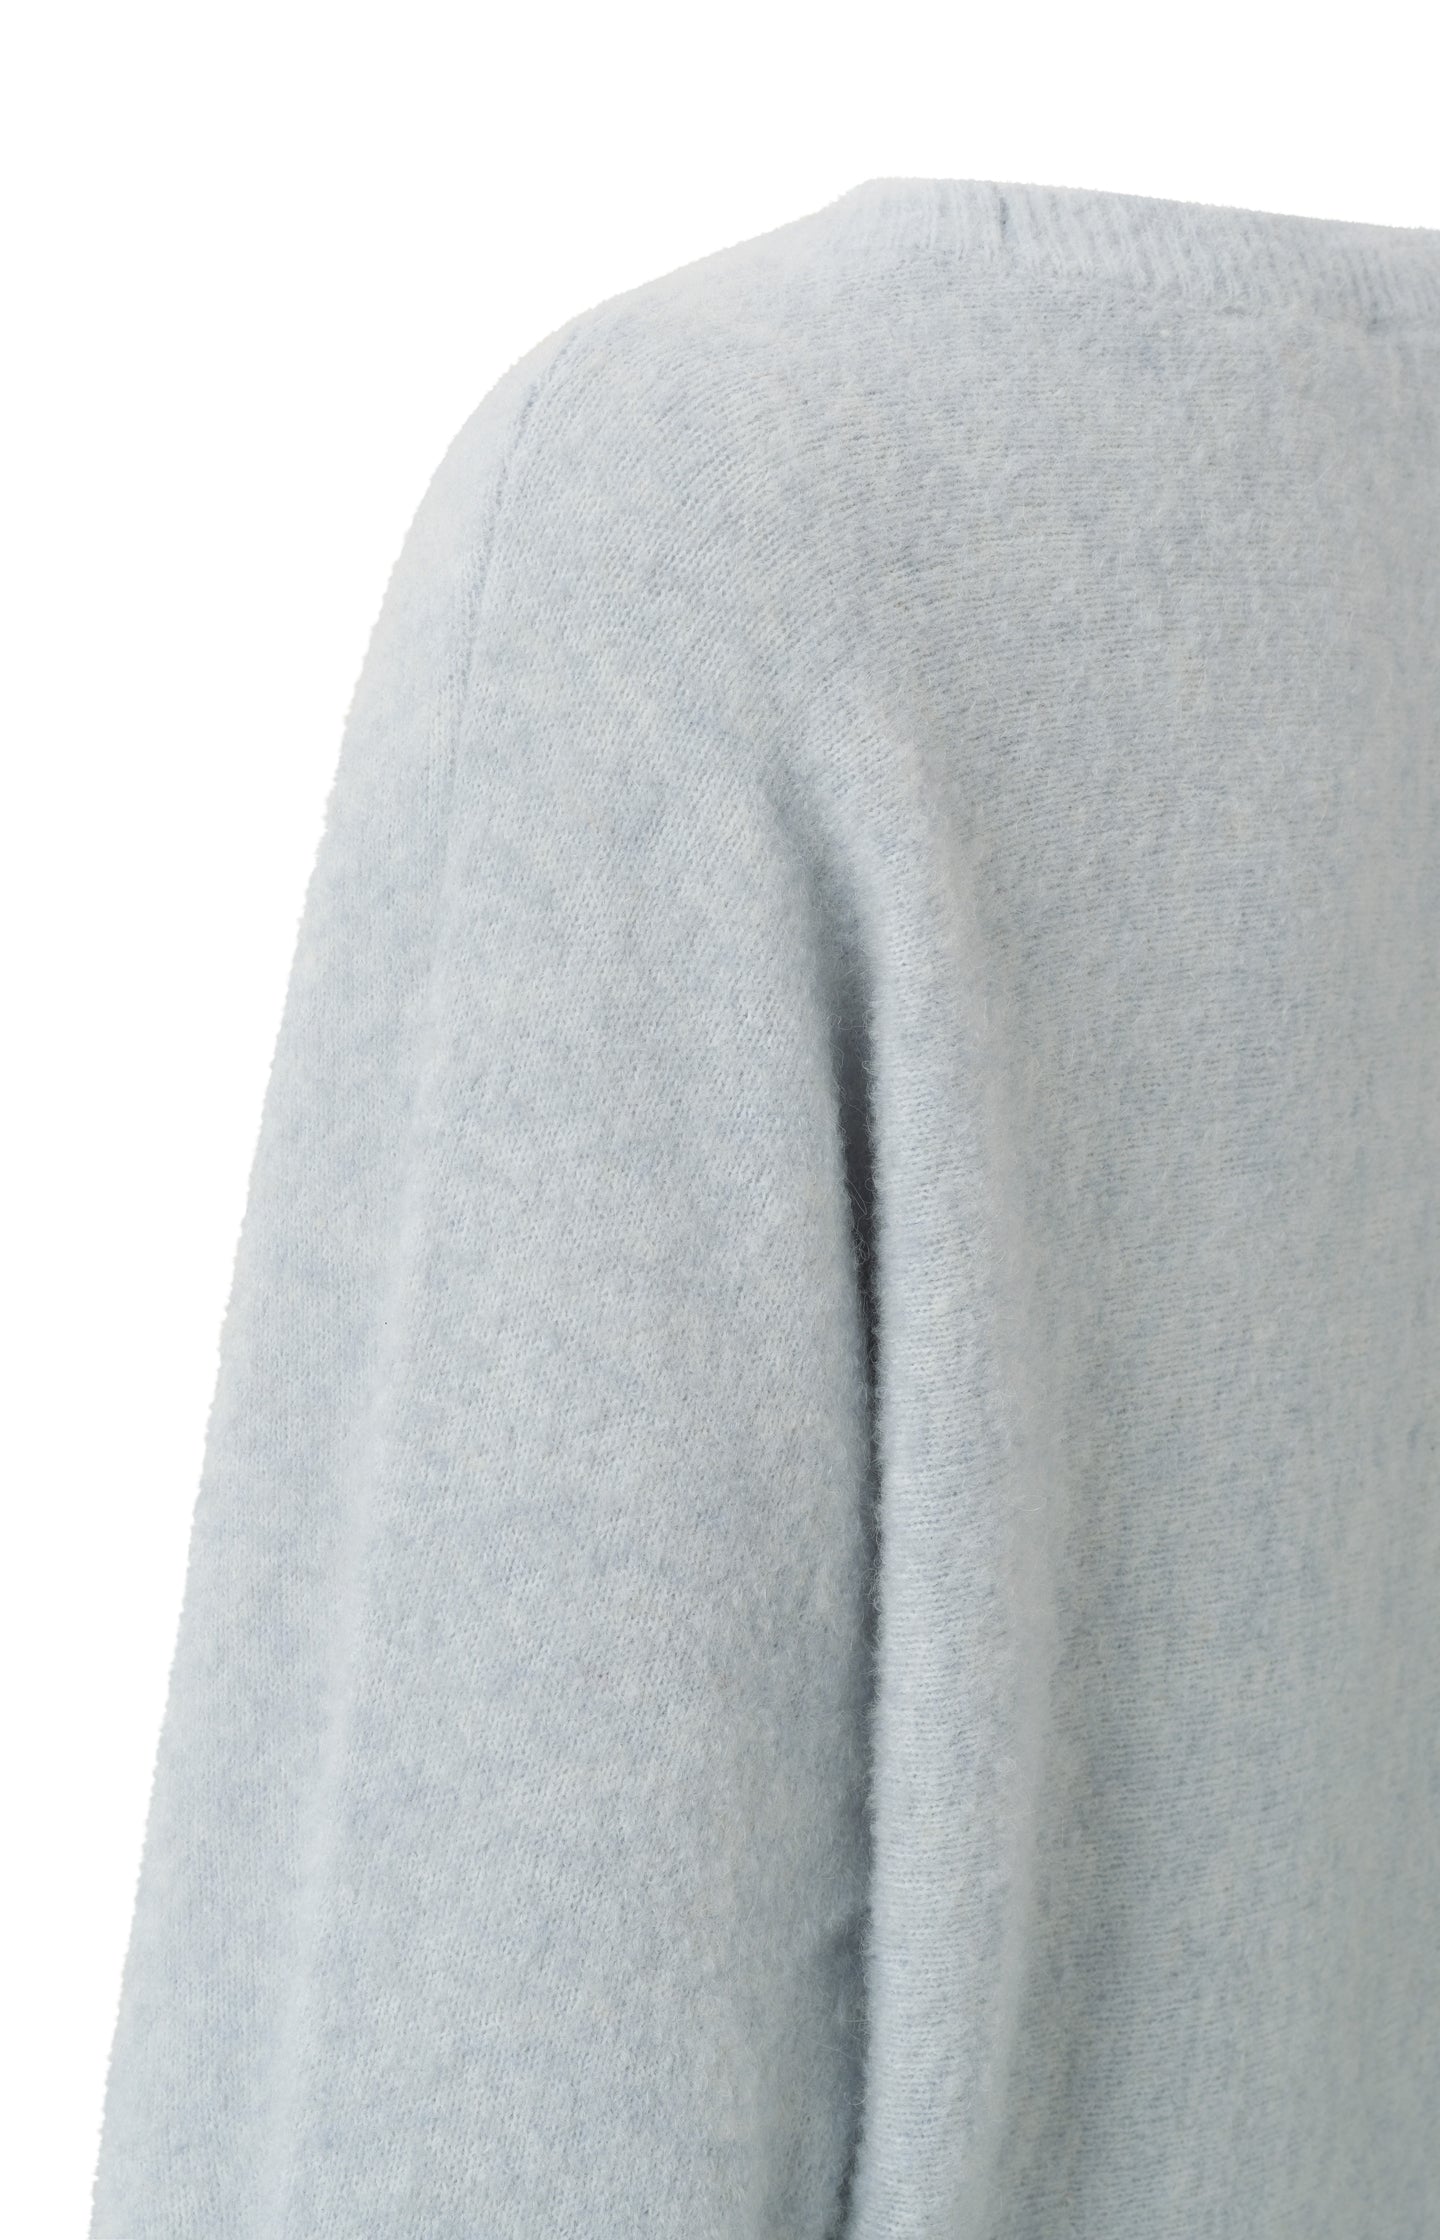 Boatneck sweater with long sleeves and a seam detail